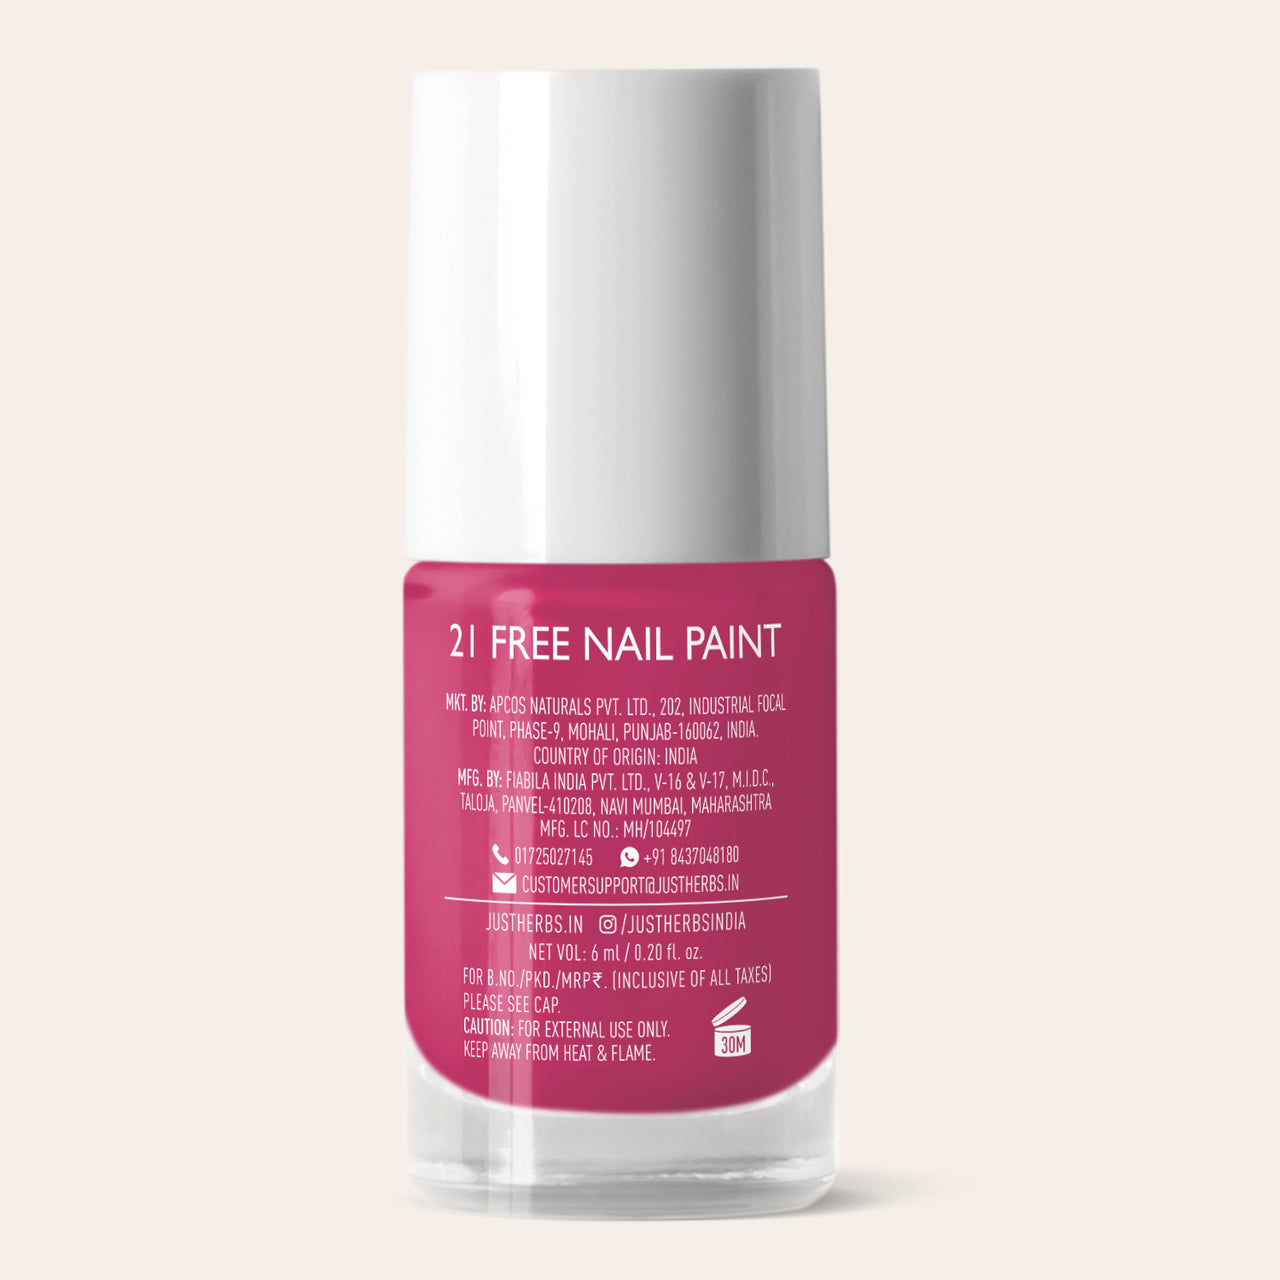 Detailed project report on nail polish | Best startup ideas | Internet  business ideas | Online service business ideas | Online business in india